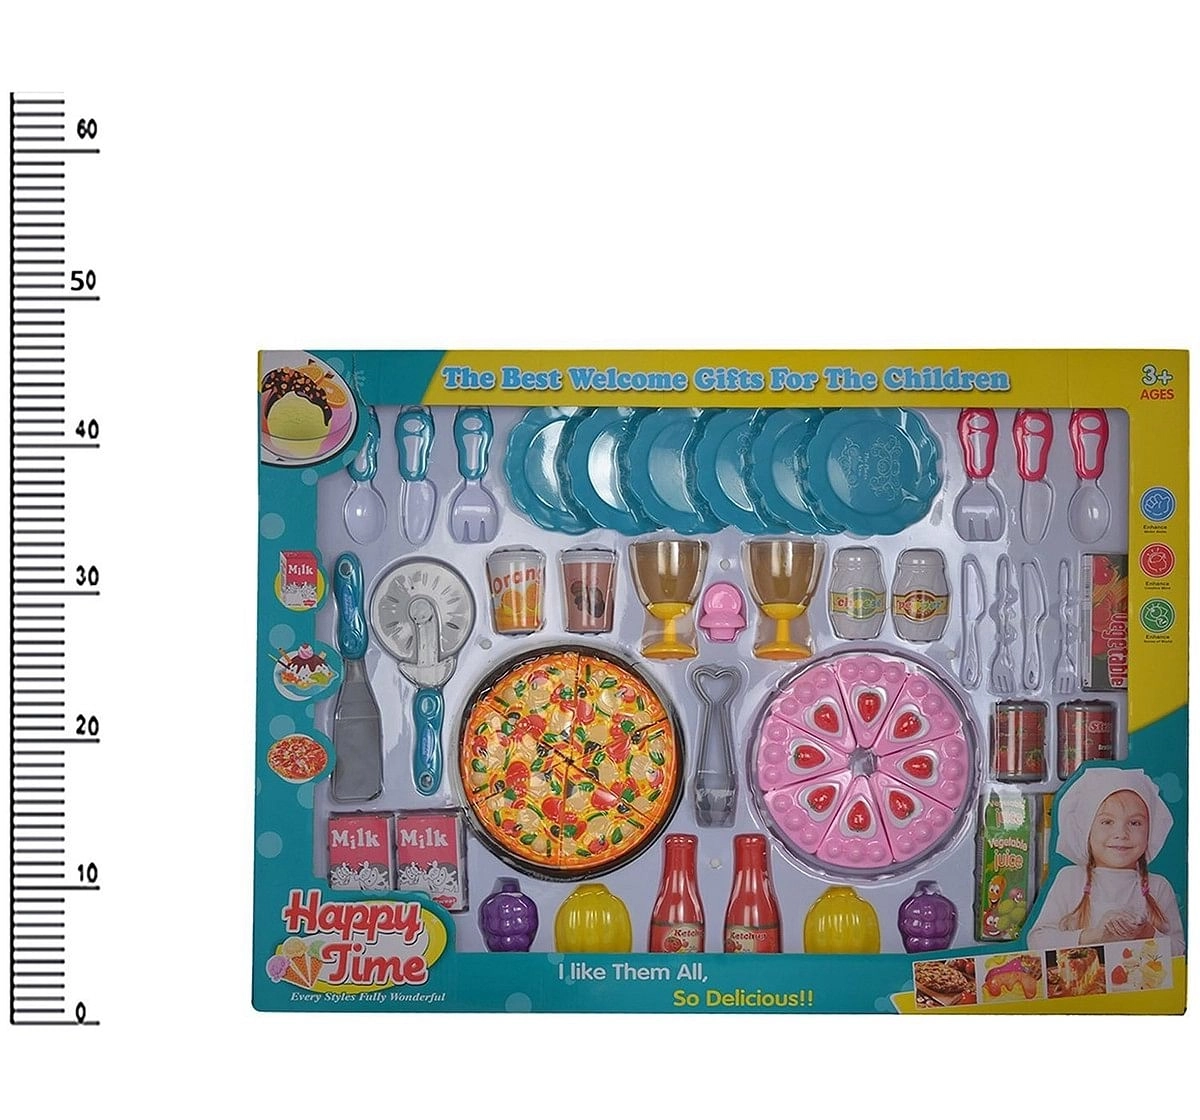 Comdaq Cake And Pizza Dinner Playset for age 4Y+ 